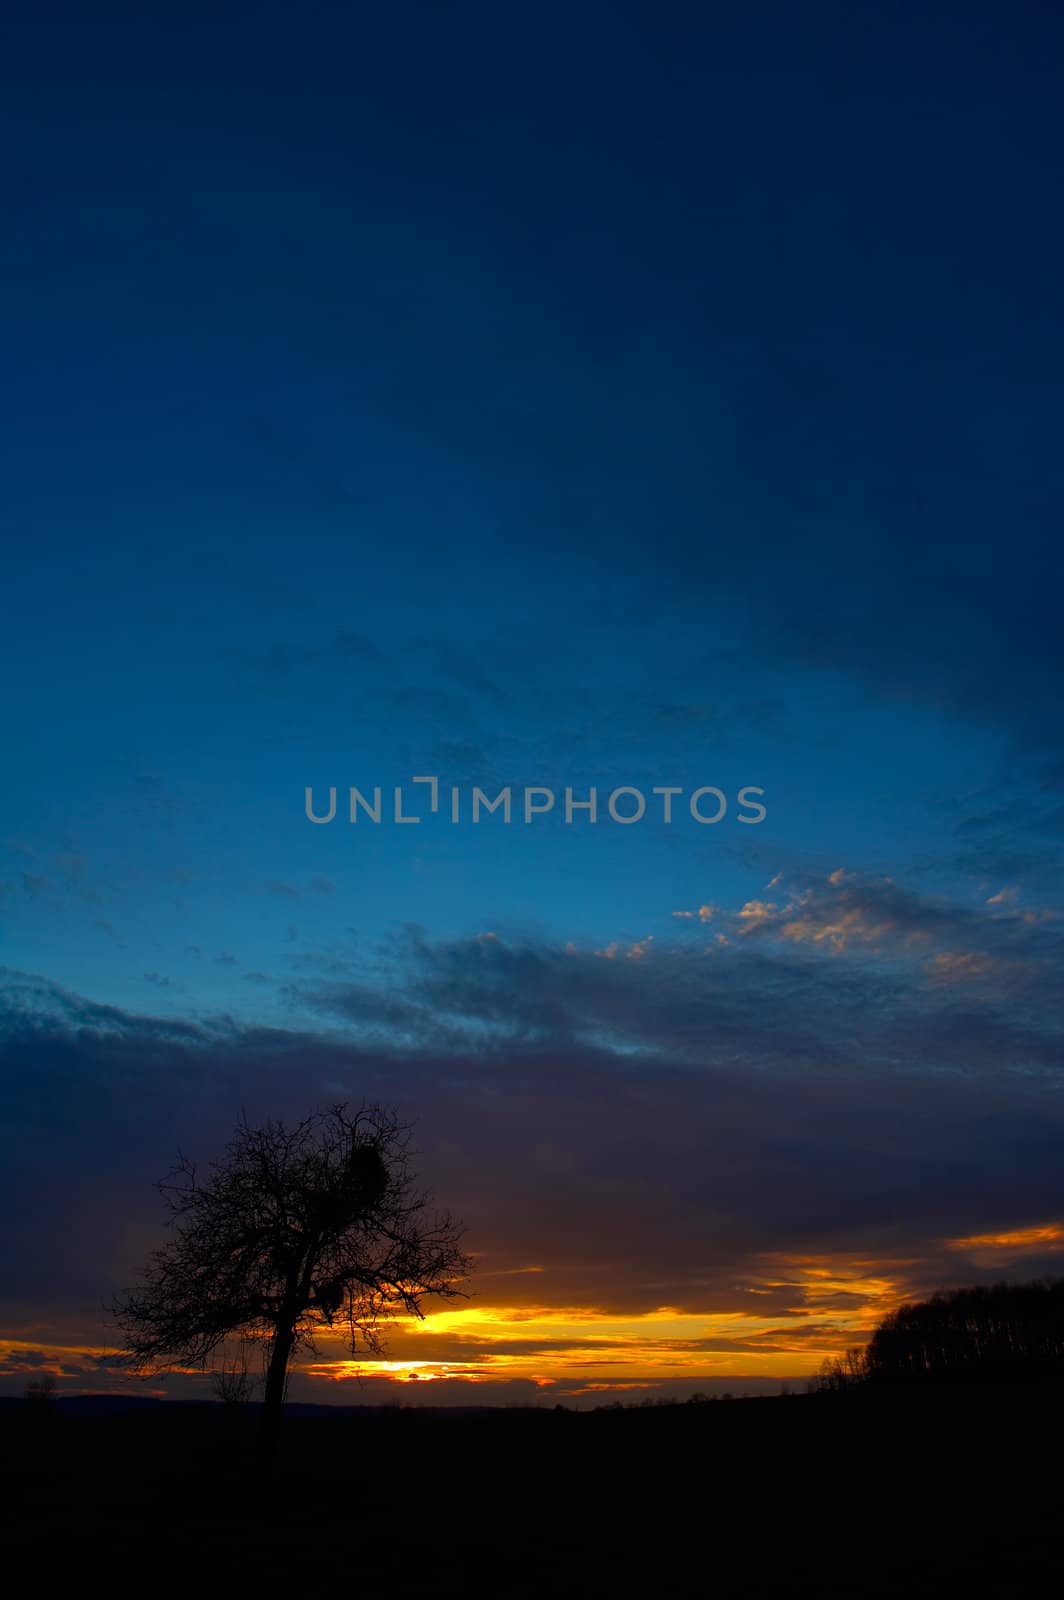 Colorful sunset with a lonely tree against the colored sky